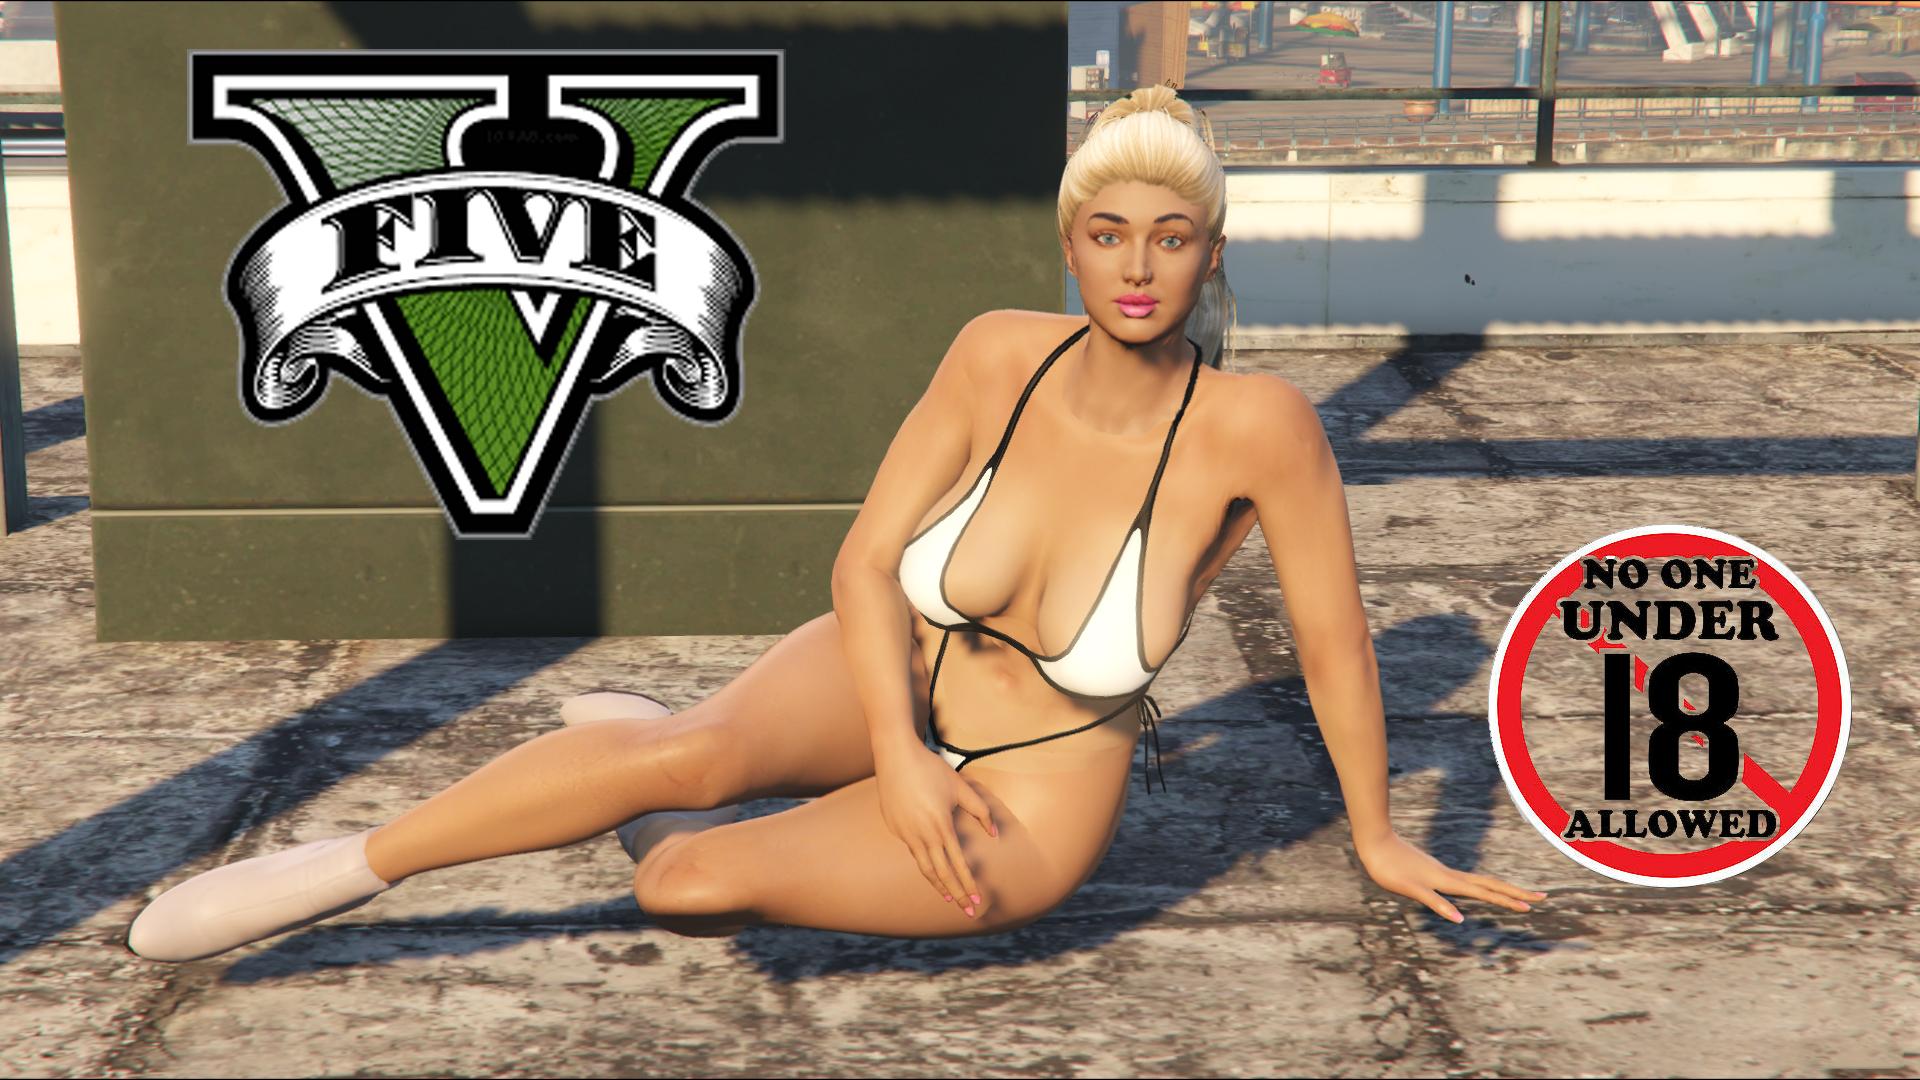 cory hannah recommends gta 5 all stripers pic